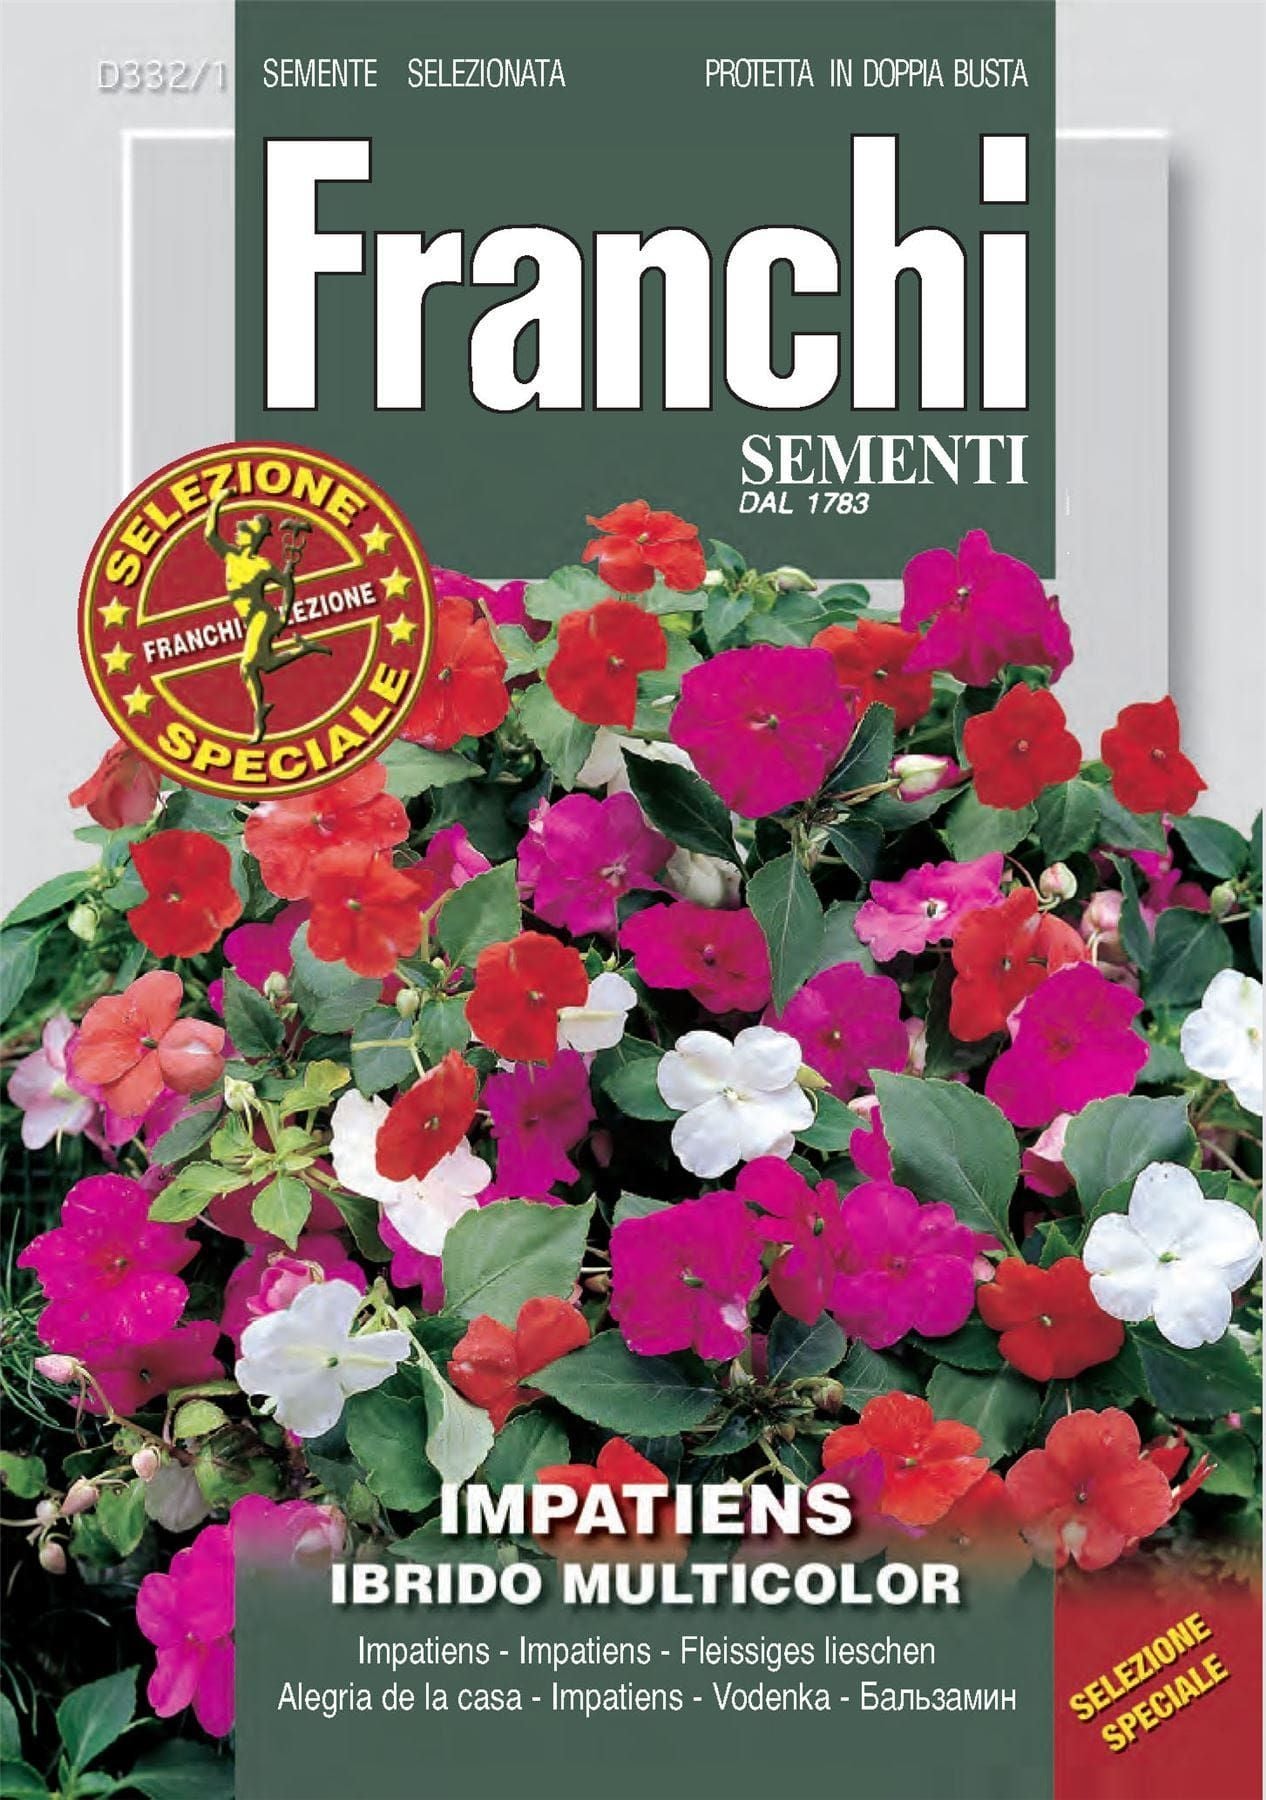 Franchi Seeds of Italy - Flower - FDBF_S 332-1 - Impatiens - Ibrido Mix - Seeds